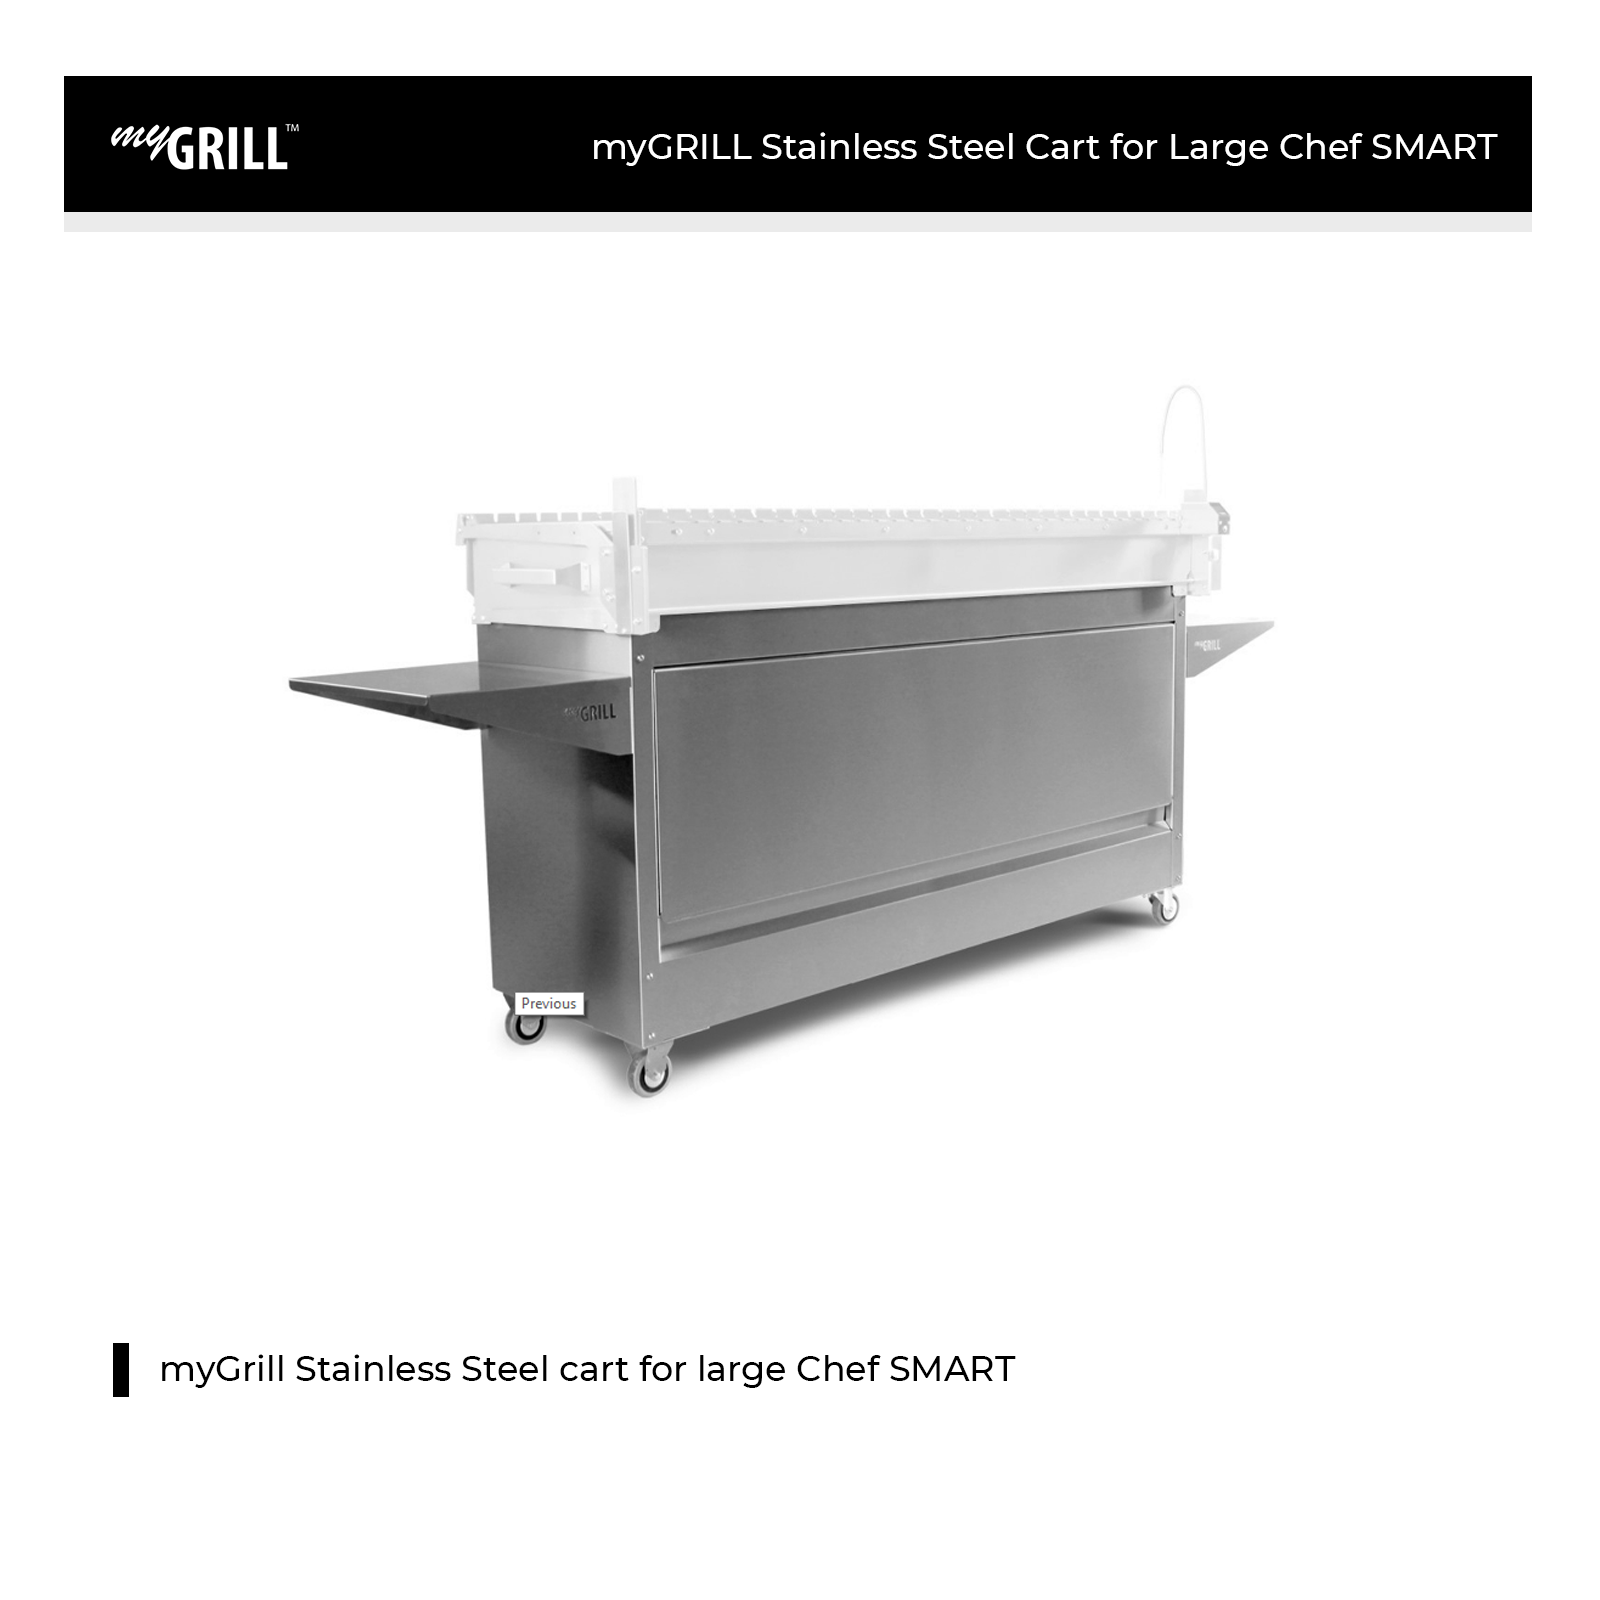 myGRILL Stainless Steel Cart for Large Chef SMART - 950010-24523015